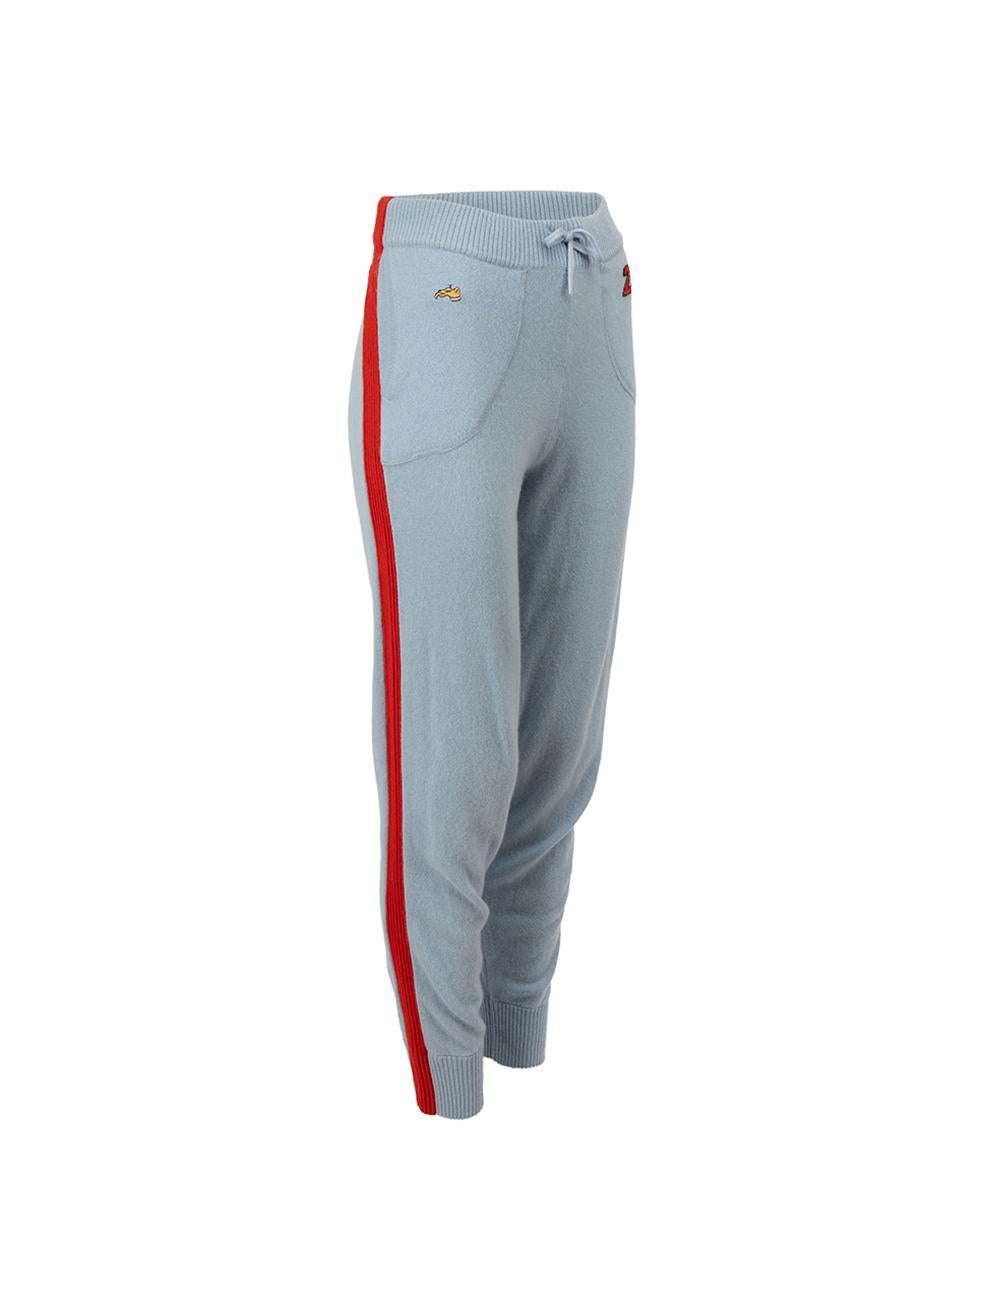 CONDITION is Never worn, with tags. No visible wear to trousers is evident on this new Bella Freud designer resale item. 



Details


Blue

Cashmere

Knitted track trousers

Stretchy

Red contrast side stripe

Elasticated waistband with